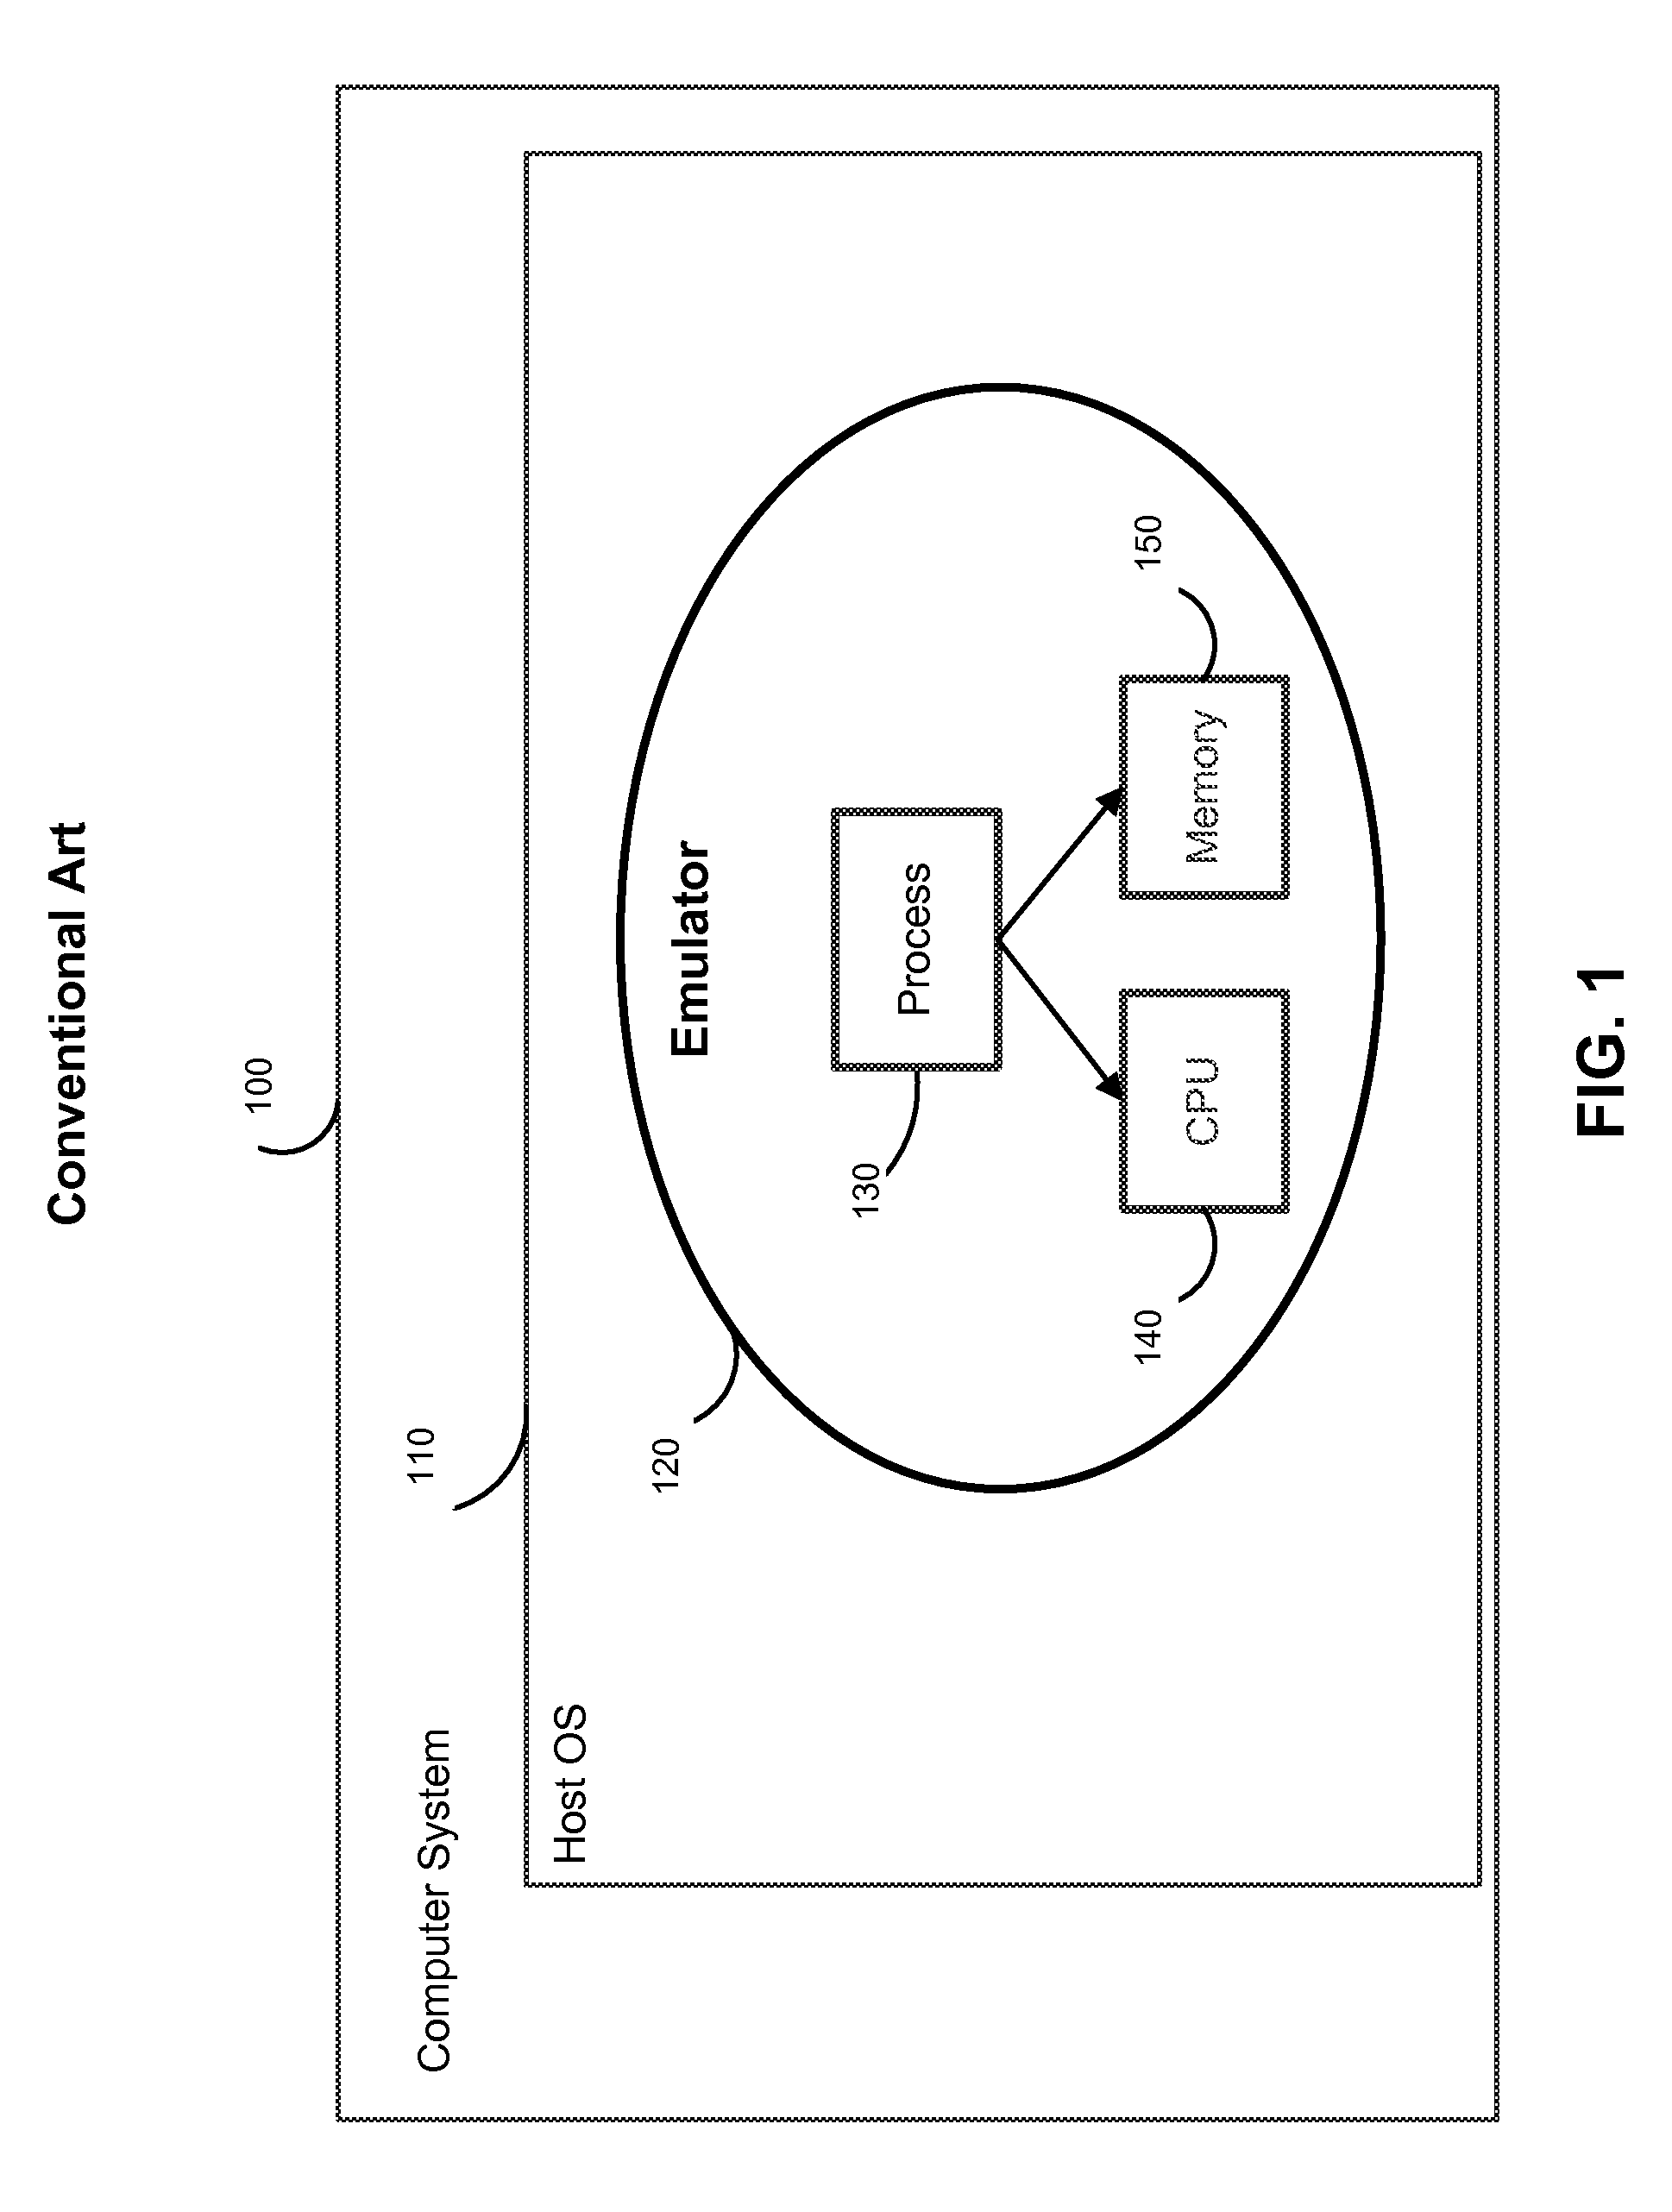 Method for accelerating hardware emulator used for malware detection and analysis